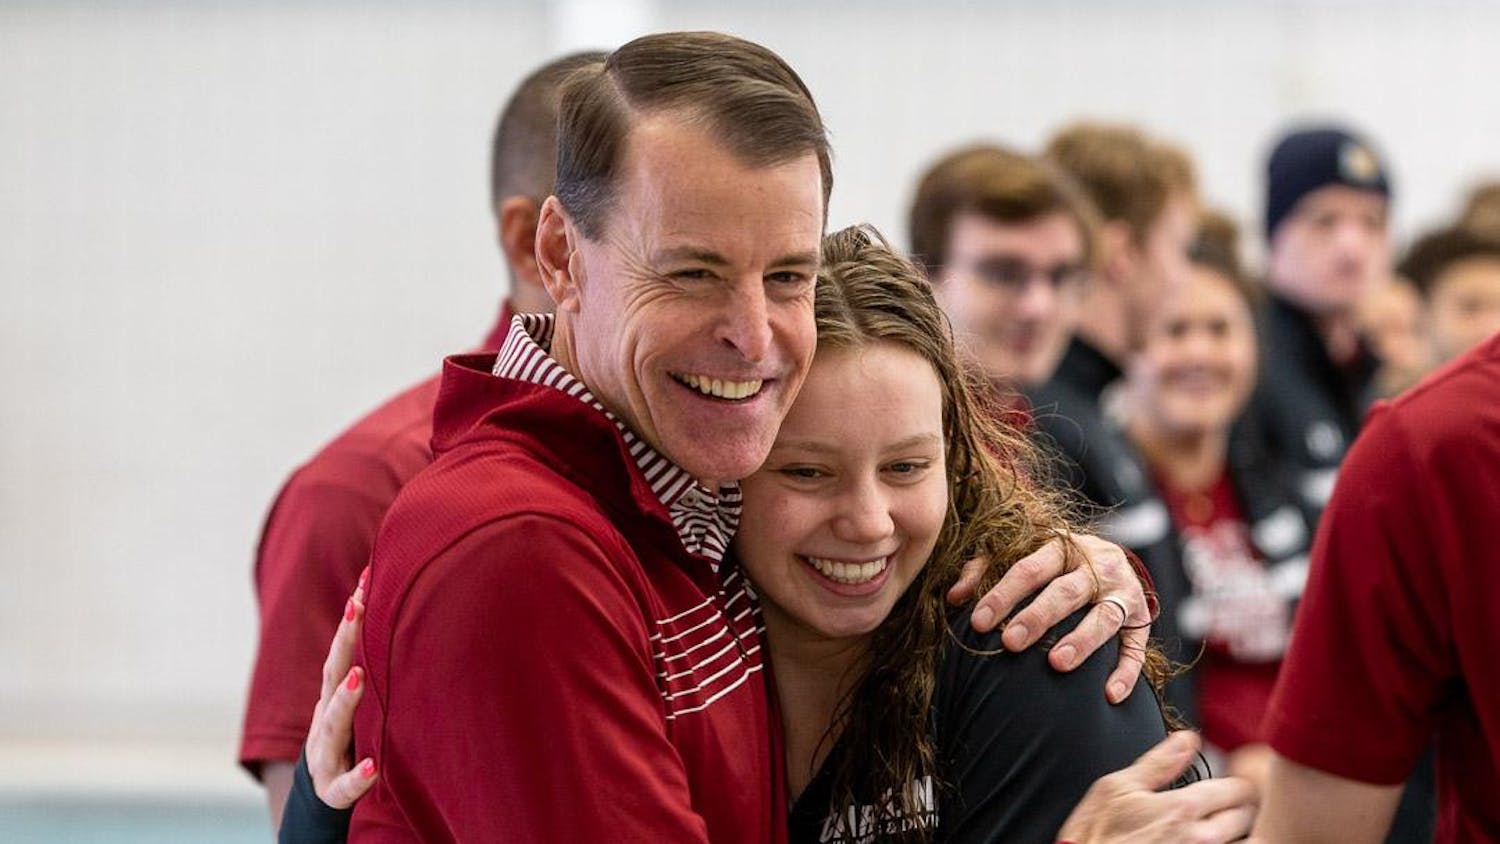 Senior backstroke swimmer Bella Pantano (right) hugs head coach Jeff Poppell during the swim and dive team’s senior recognition event before the tri-meet at the Carolina Natatorium on Jan. 20, 2024. Coaches, staff and family members joined the seniors as they were each presented with plaques.